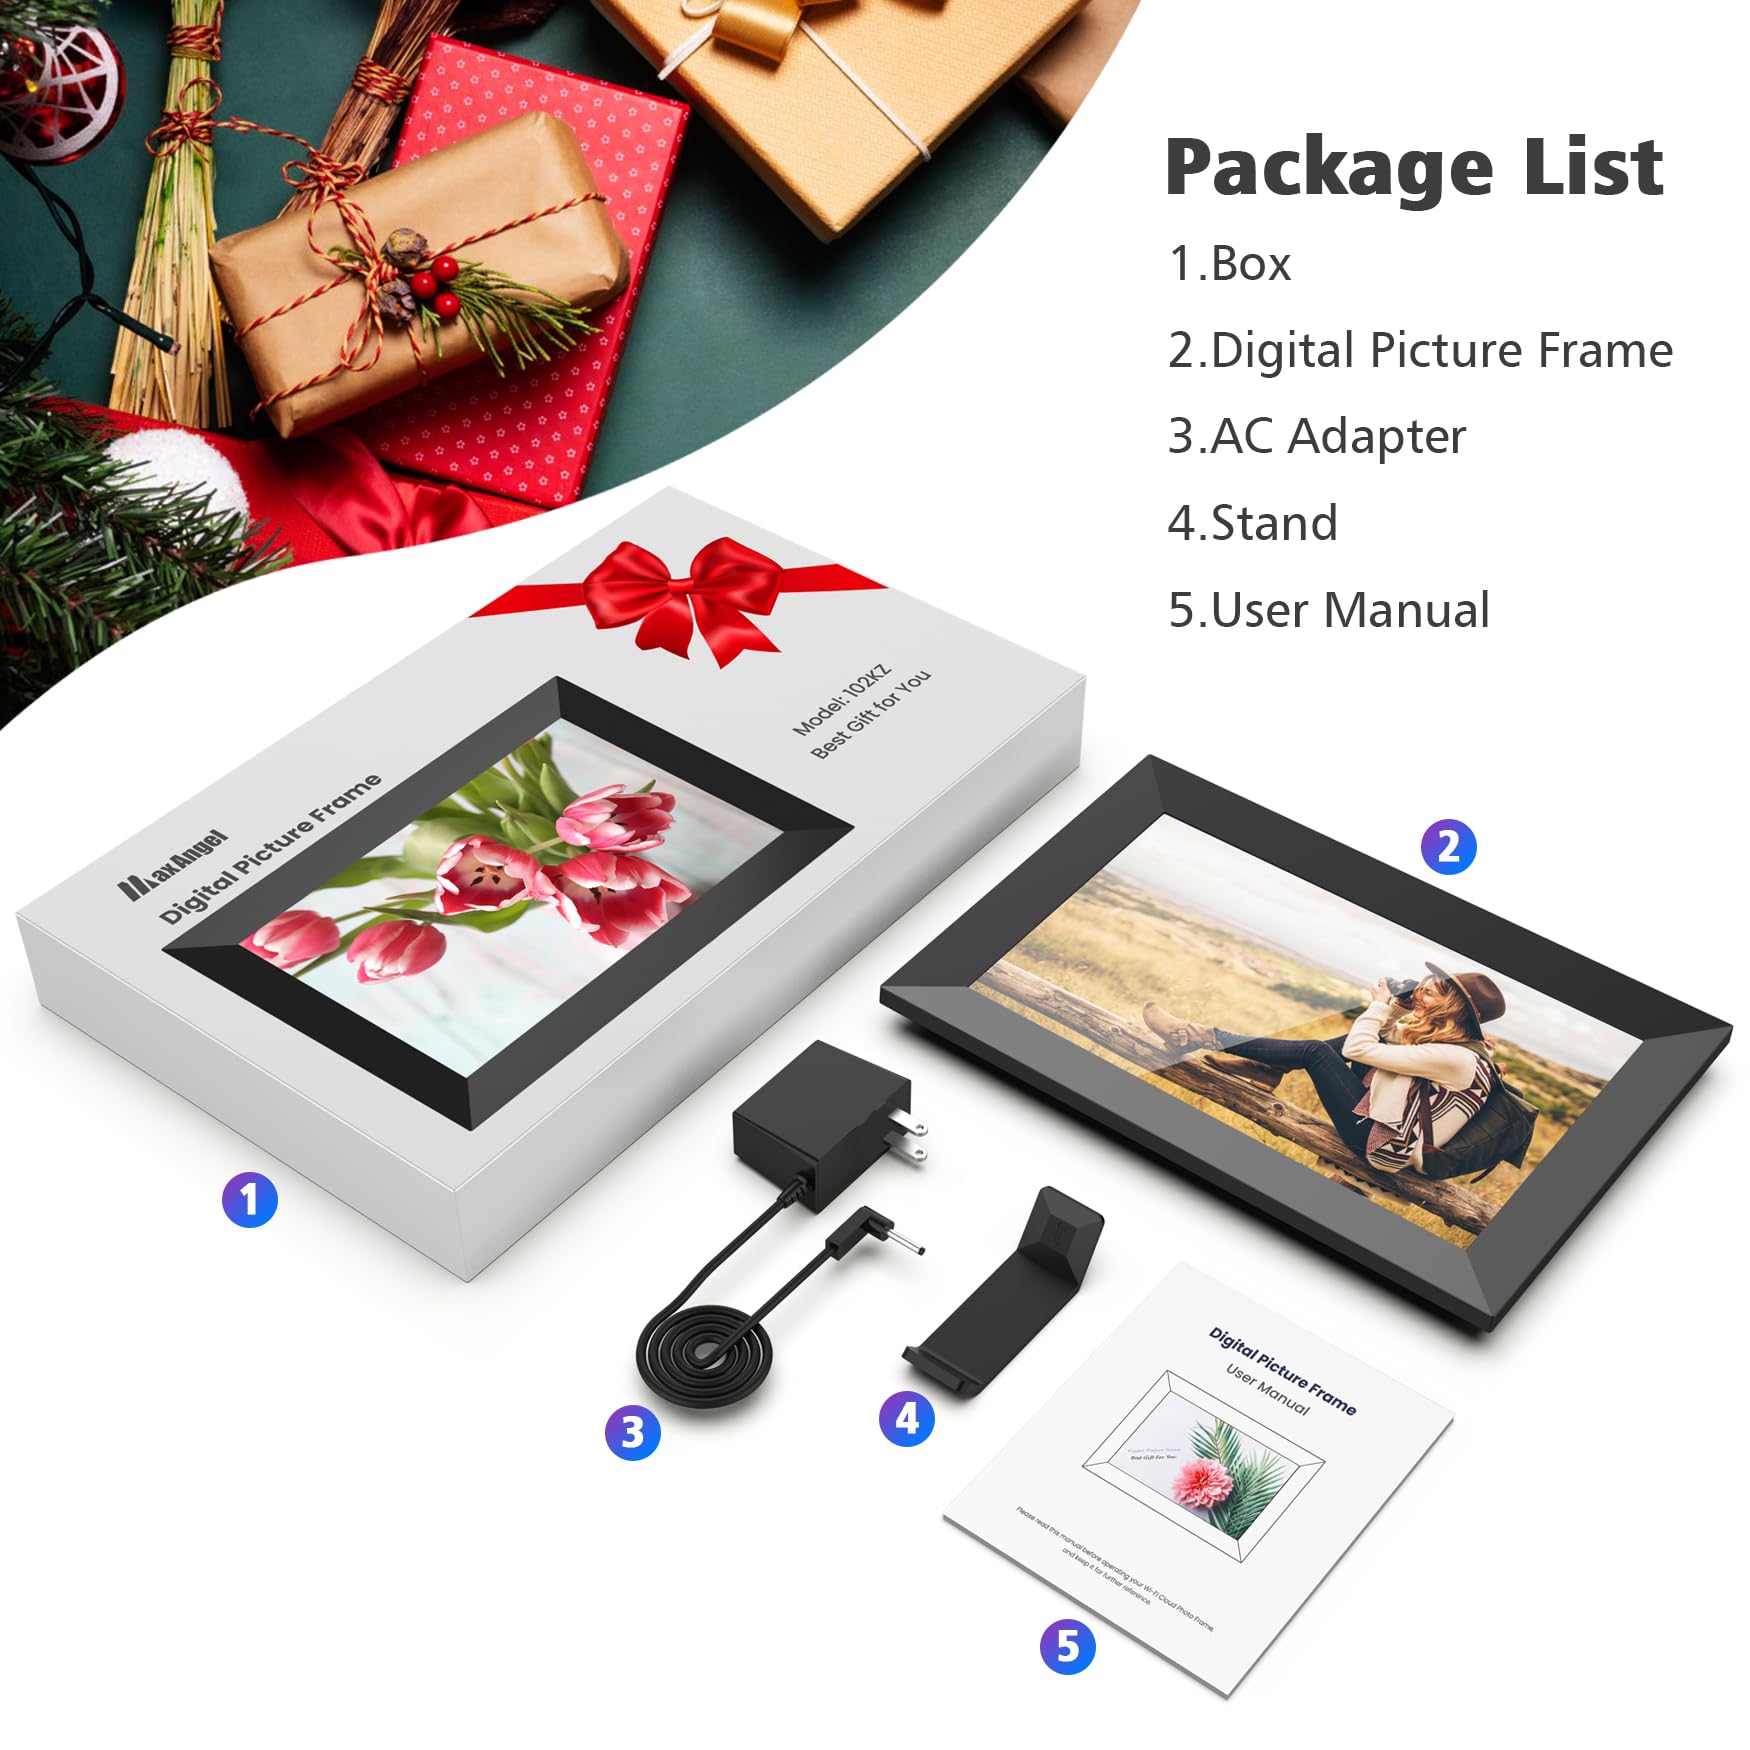 MaxAngel Digital Picture Frame 10.1 Inch WiFi Electronic Photo Frame 16GB Storage SD Card Slot Desktop IPS Touch Screen HD Display Auto-Rotate Slideshow Share Videos Photos Remotely Via App